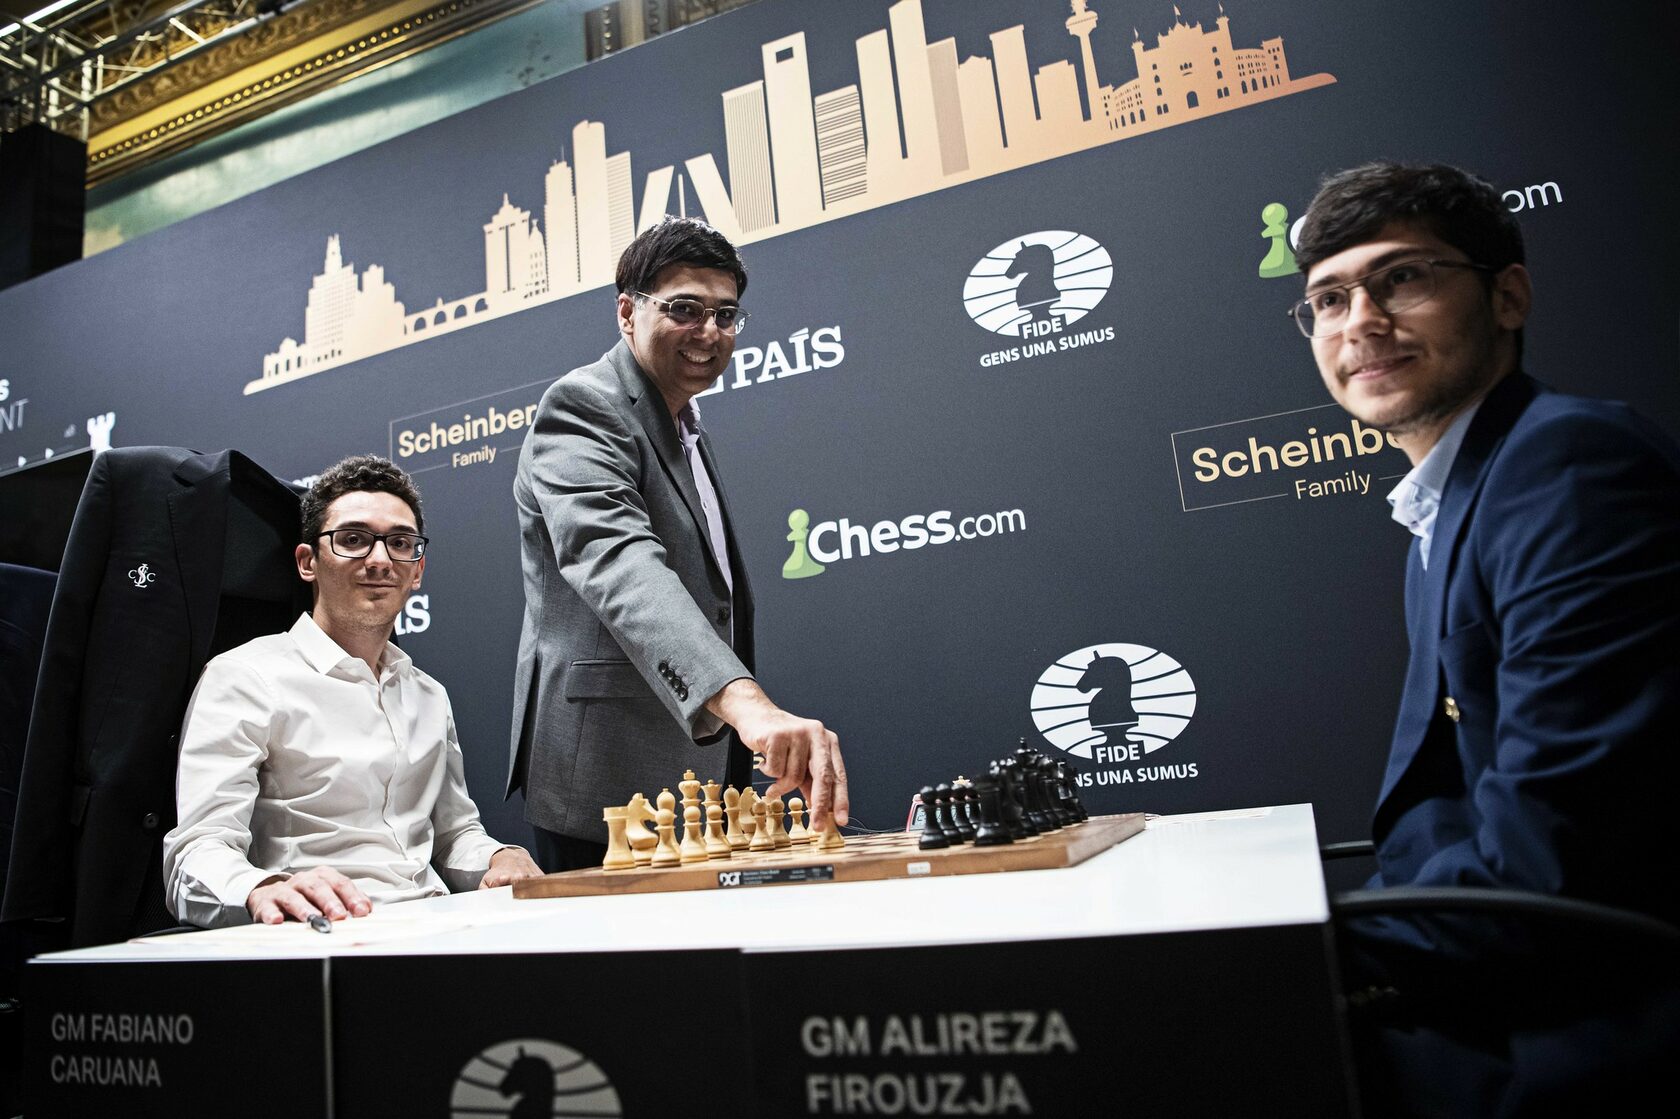 Vishy Anand outplays Alireza Firouzja with black pieces in the